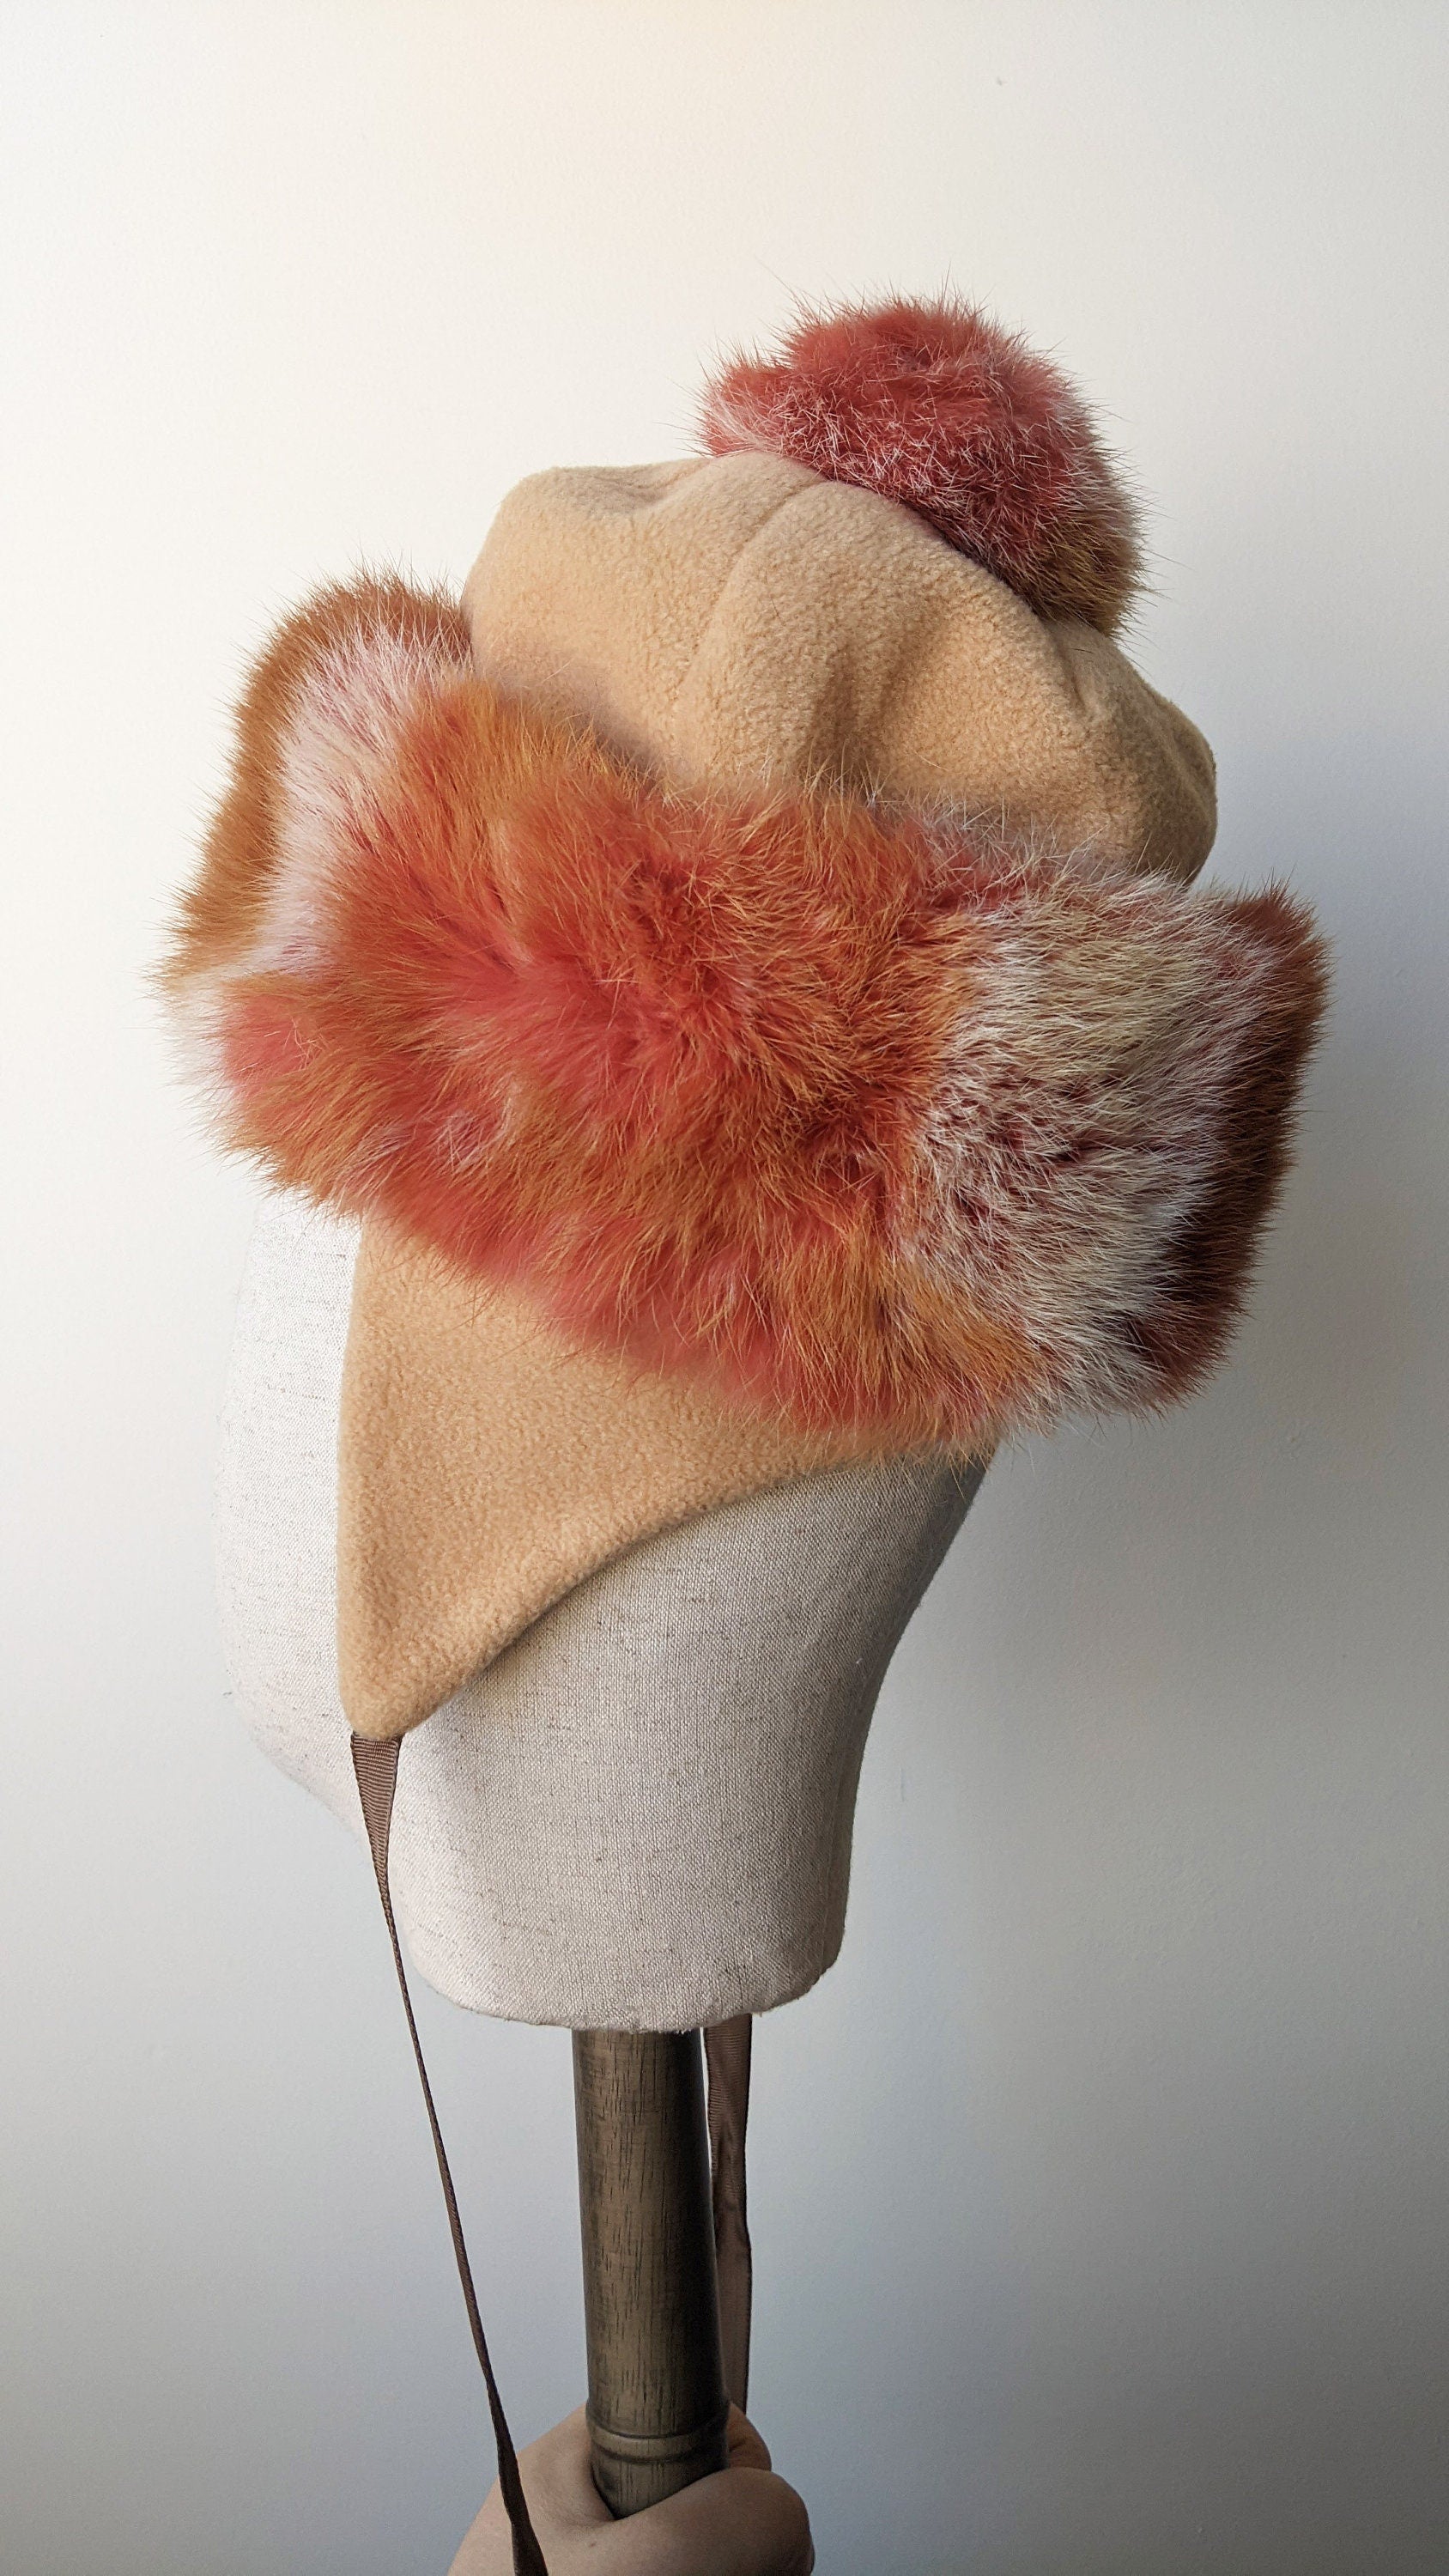 90s Russian Fur Hat with Ear Flaps and Pom Poms, Size Petite XS